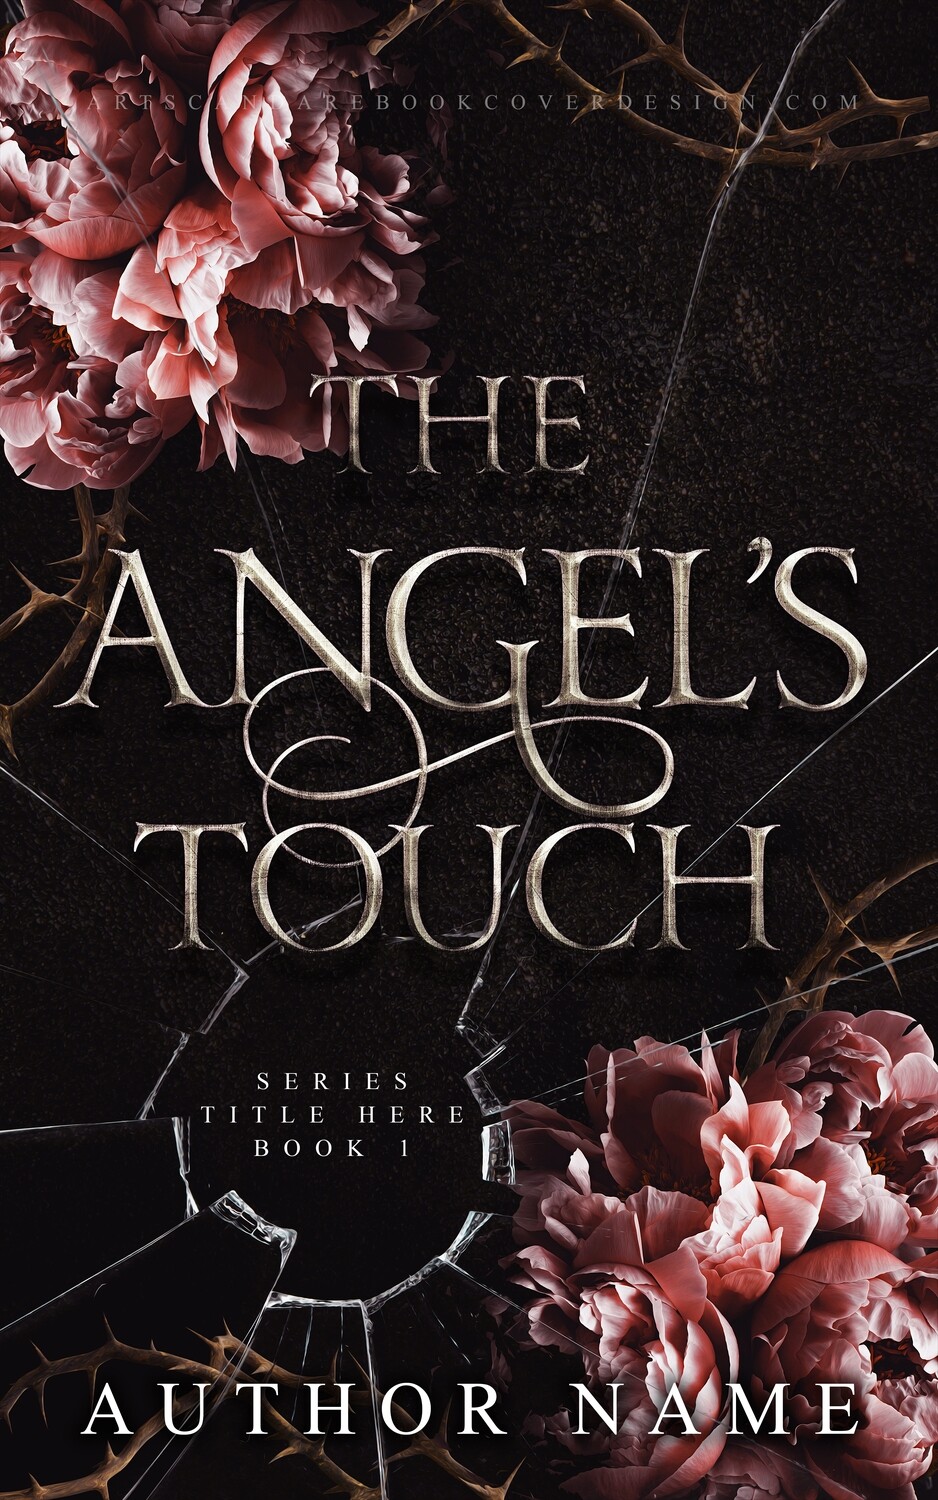 THE ANGEL'S TOUCH